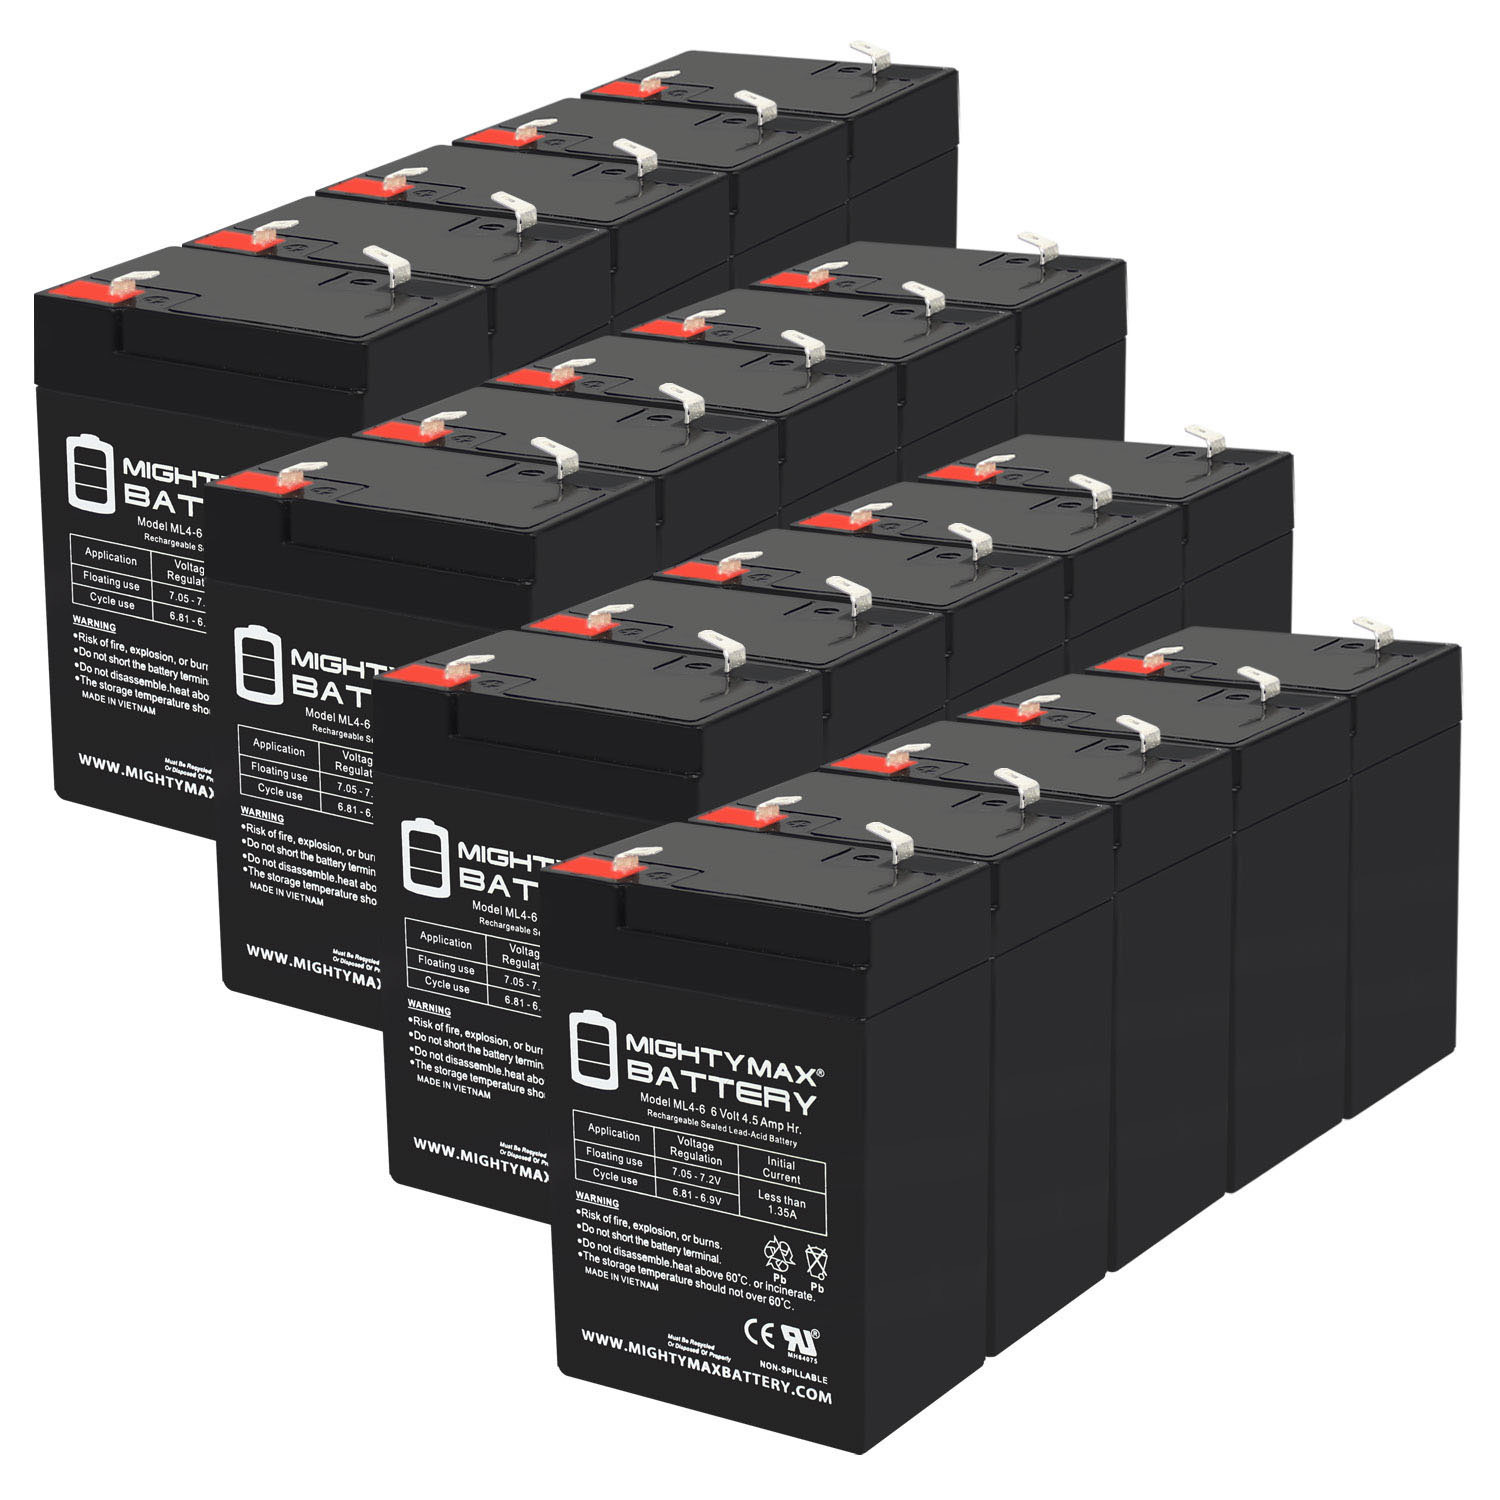 6V 4.5AH SLA Replacement Battery for Chloride QT6 - 20 Pack